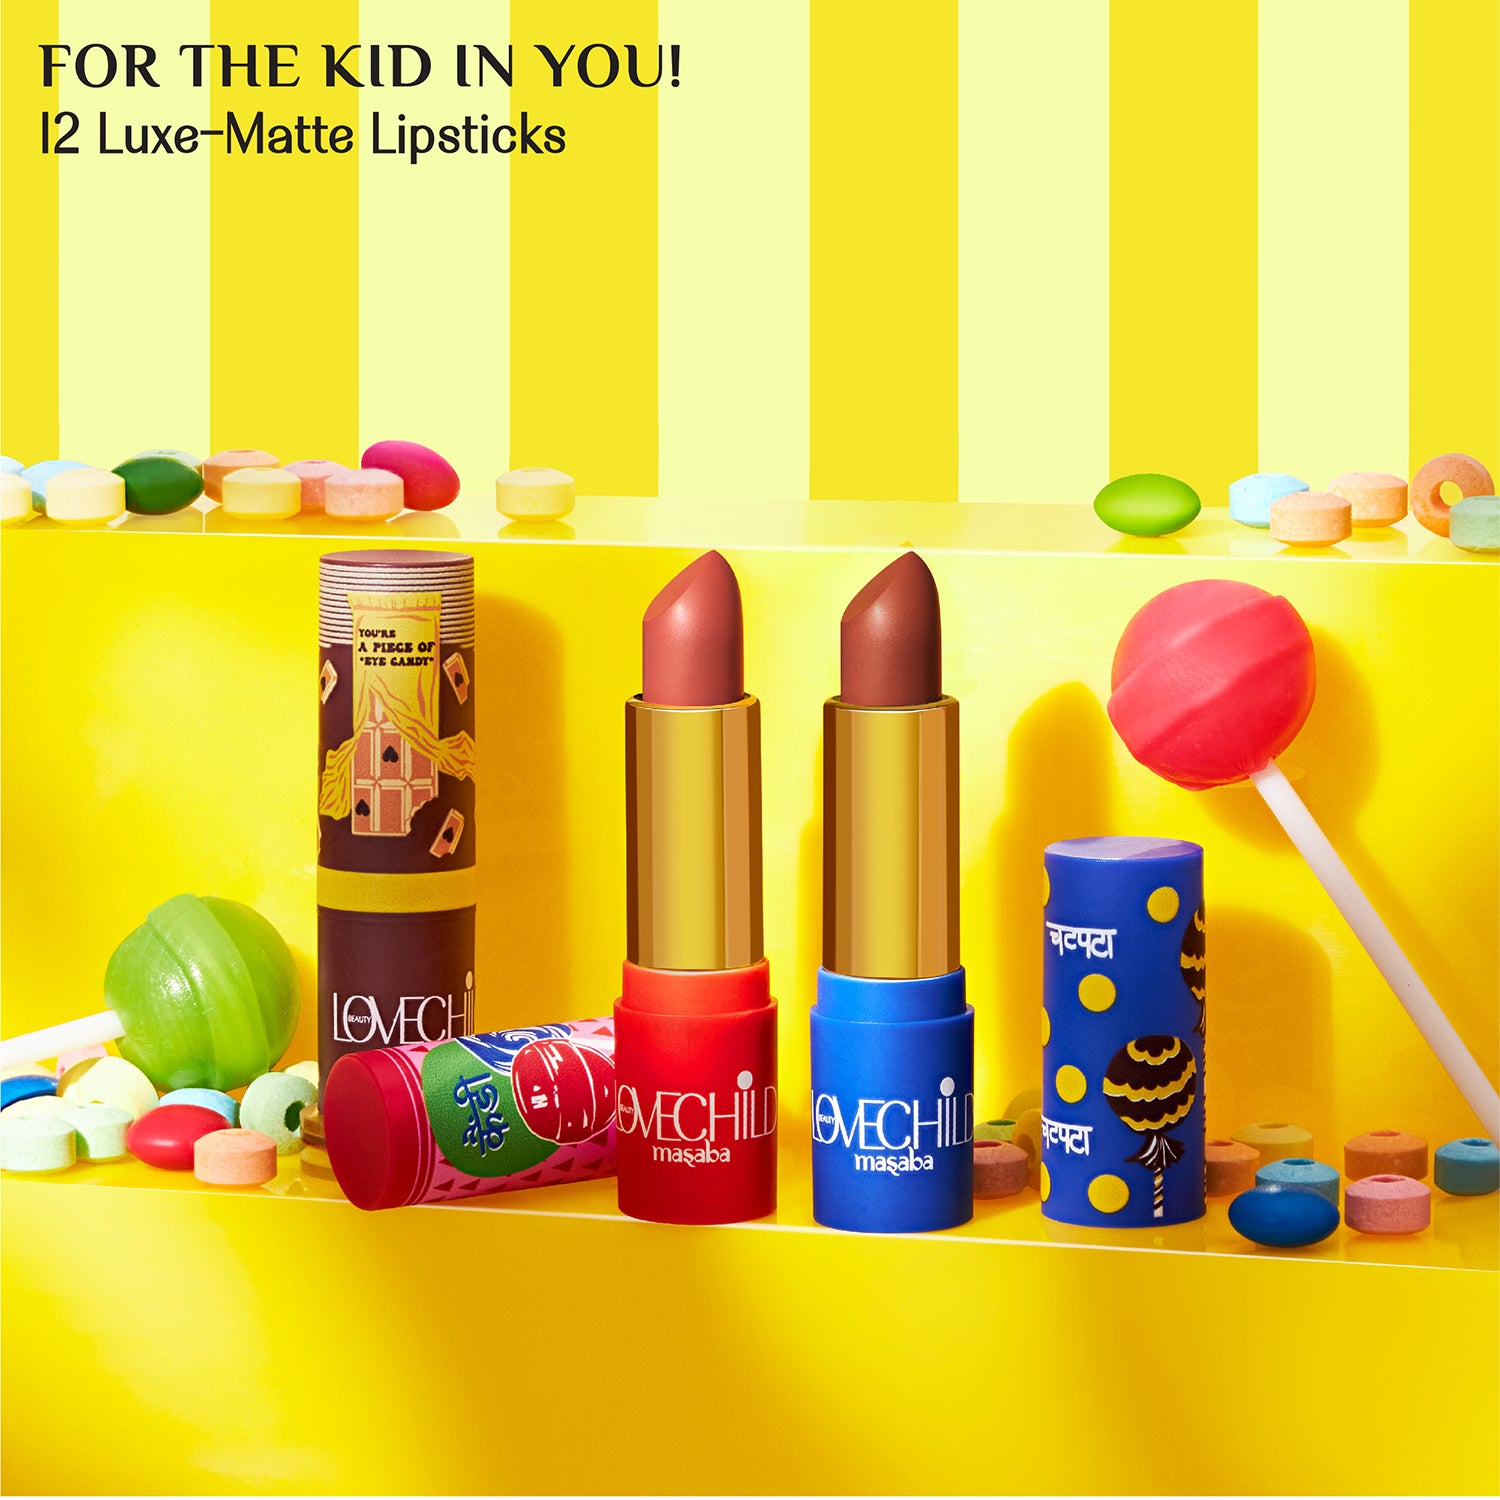 LoveChild Masaba - For the Kid in You! - 04 Caramel - Luxe Matte Lipstick